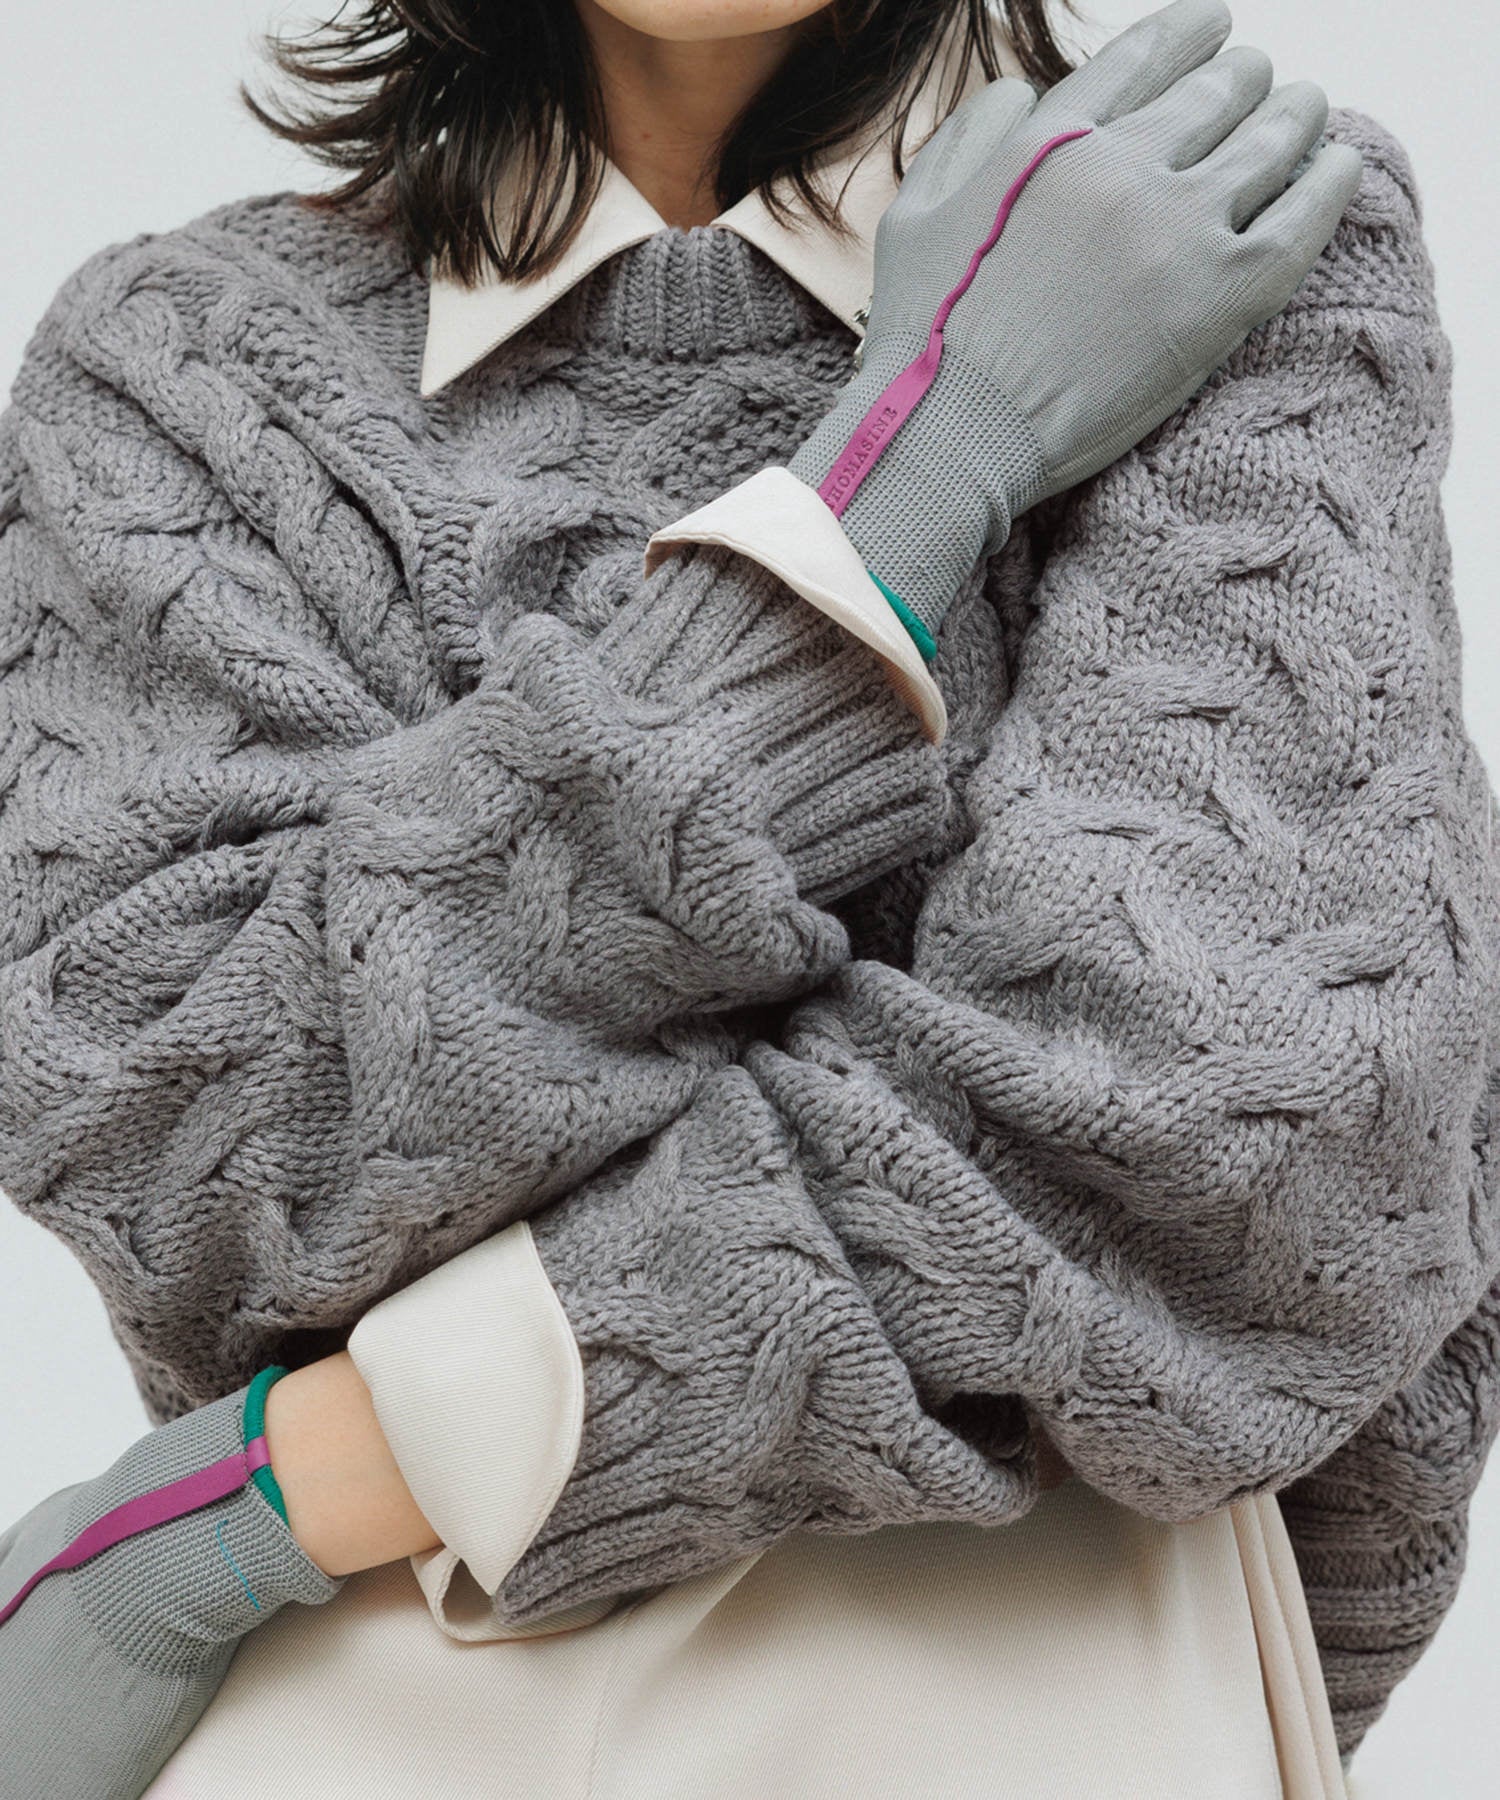 TOPS］PATCHWORK CABLE KNIT｜J'aDoRe JUN ONLINE OUTLET｜ジャドール ...